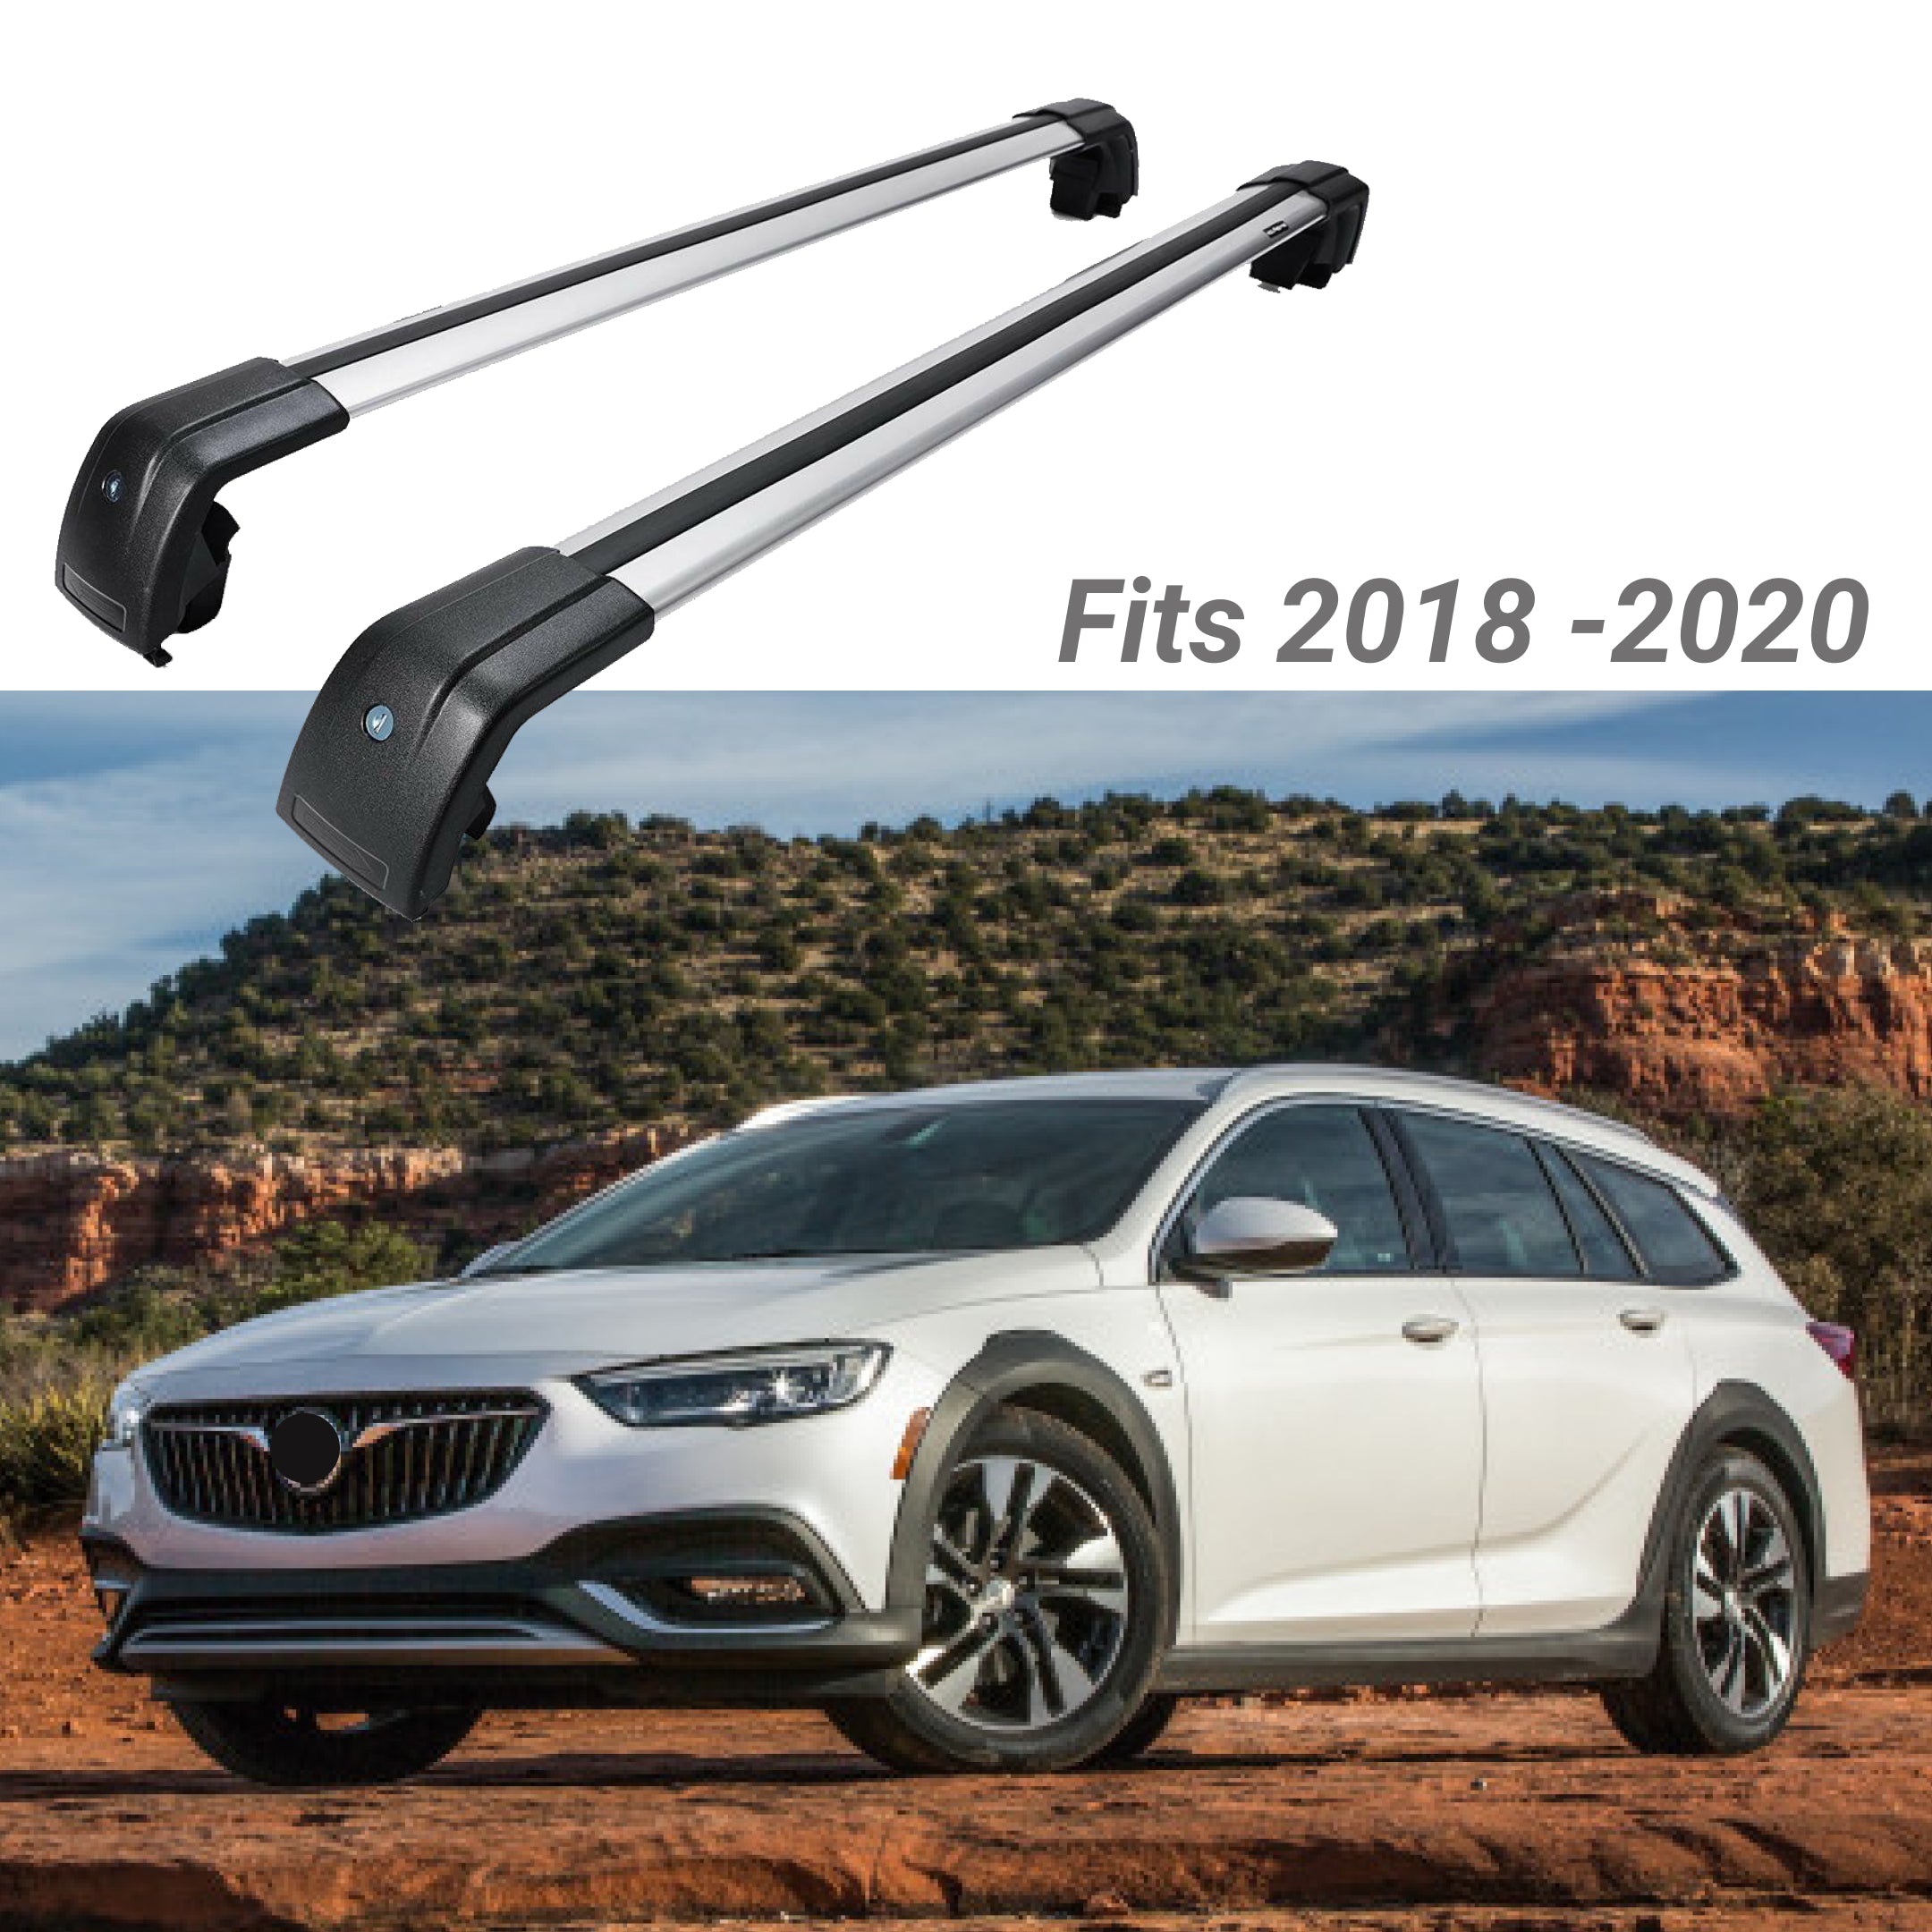 Fit 2018-2020 Regal TourX SUV Top Roof Rack Cross Bar Baggage Luggage Carrier Bar - 0